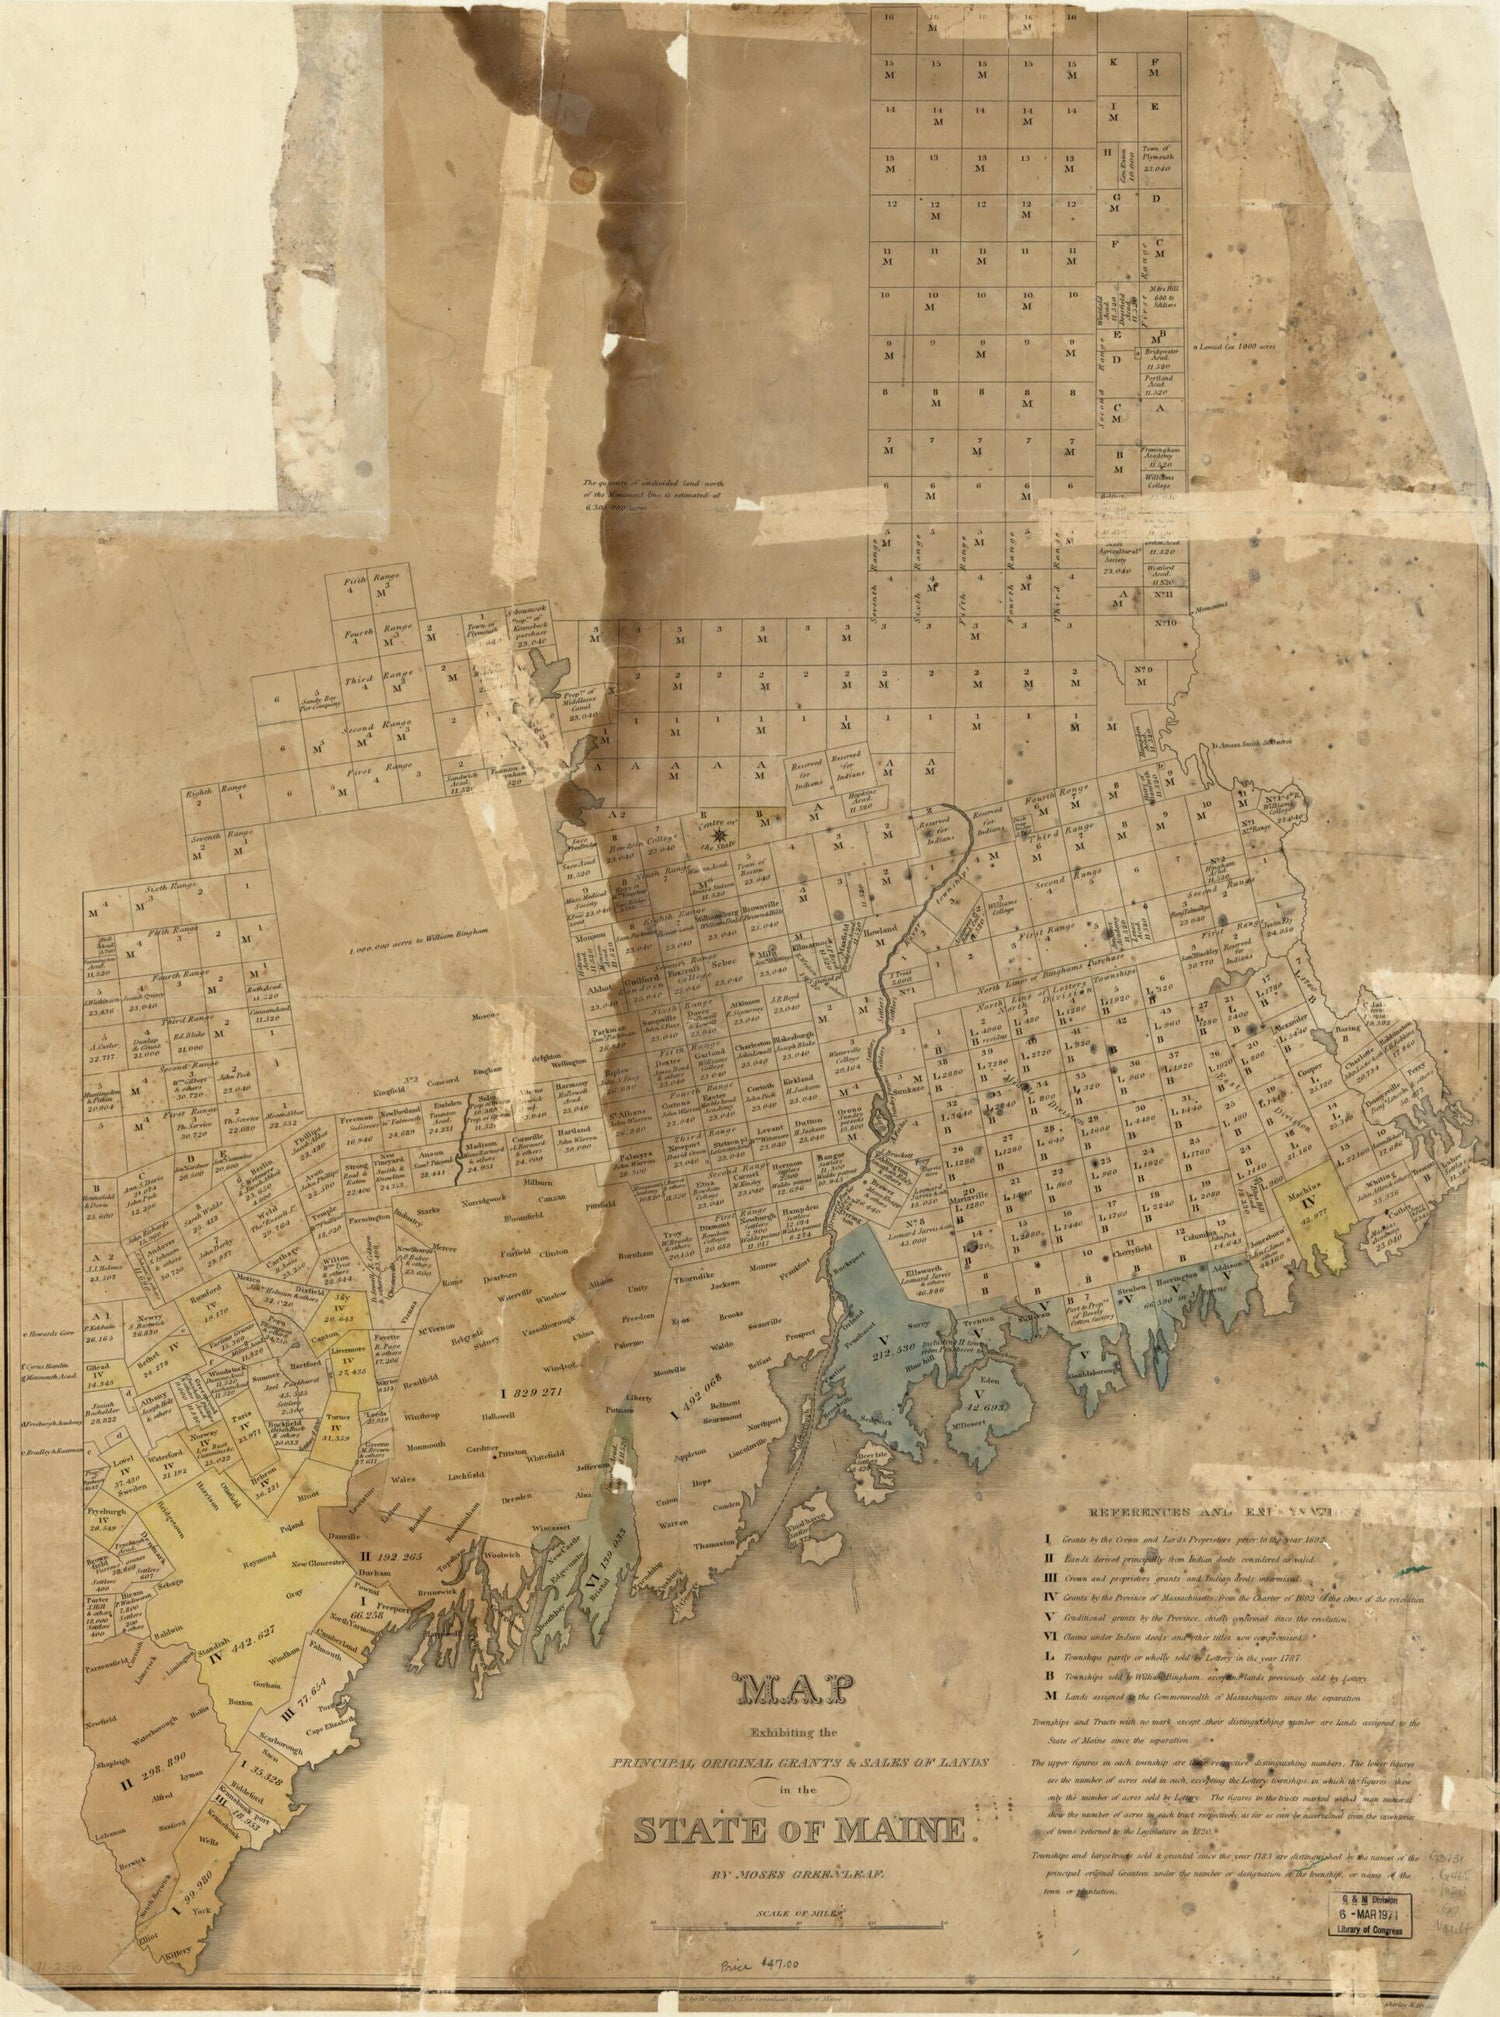 This old map of Map Exhibiting the Principal Original Grants &amp; Sales of Lands In the State of Maine from 1820 was created by W. (William) Chapin, Moses Greenleaf,  Shirley &amp; Hyde in 1820